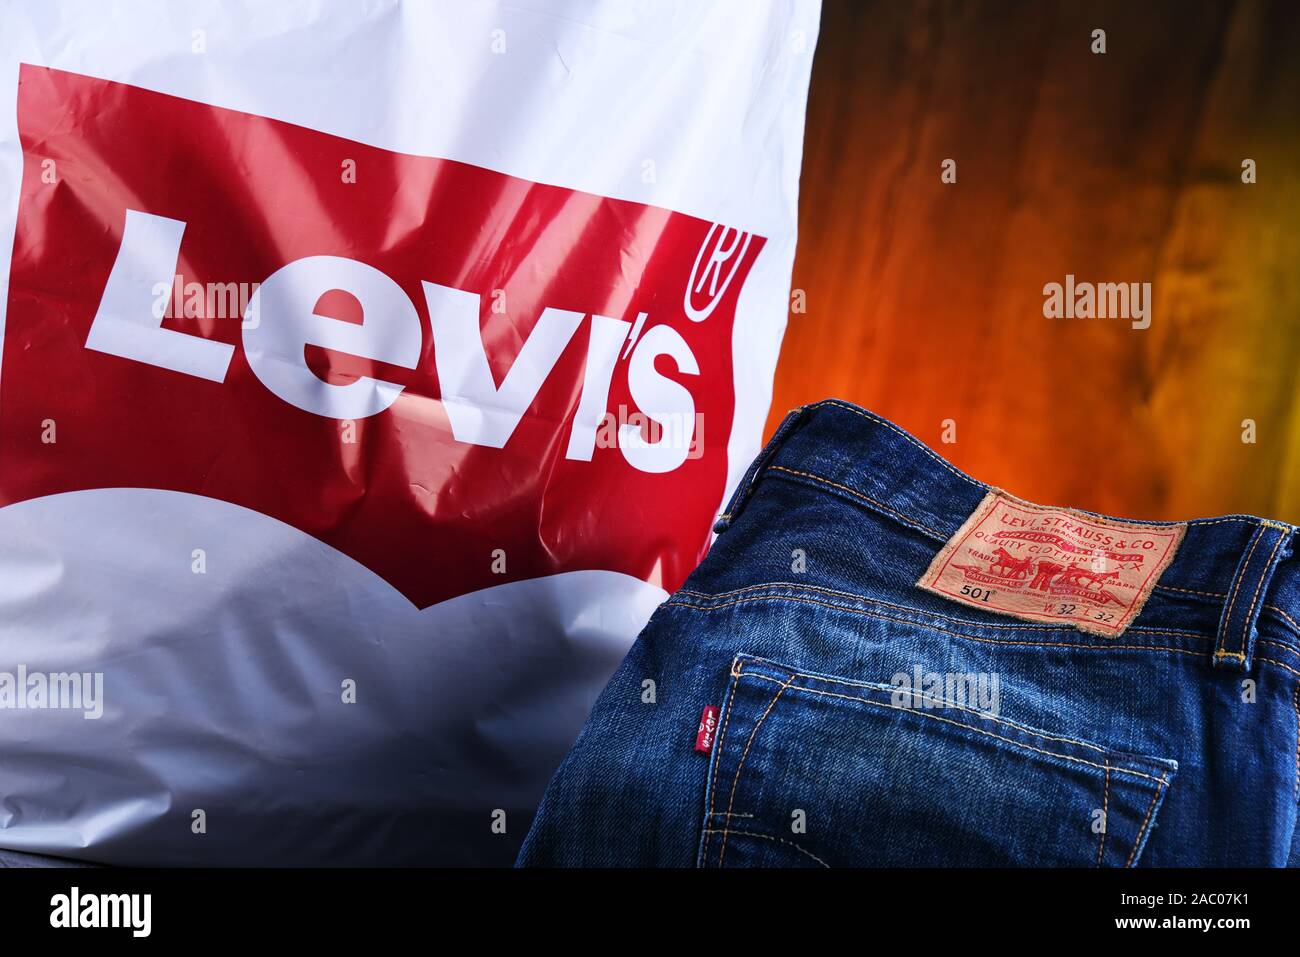 levis jeans trade in 2019